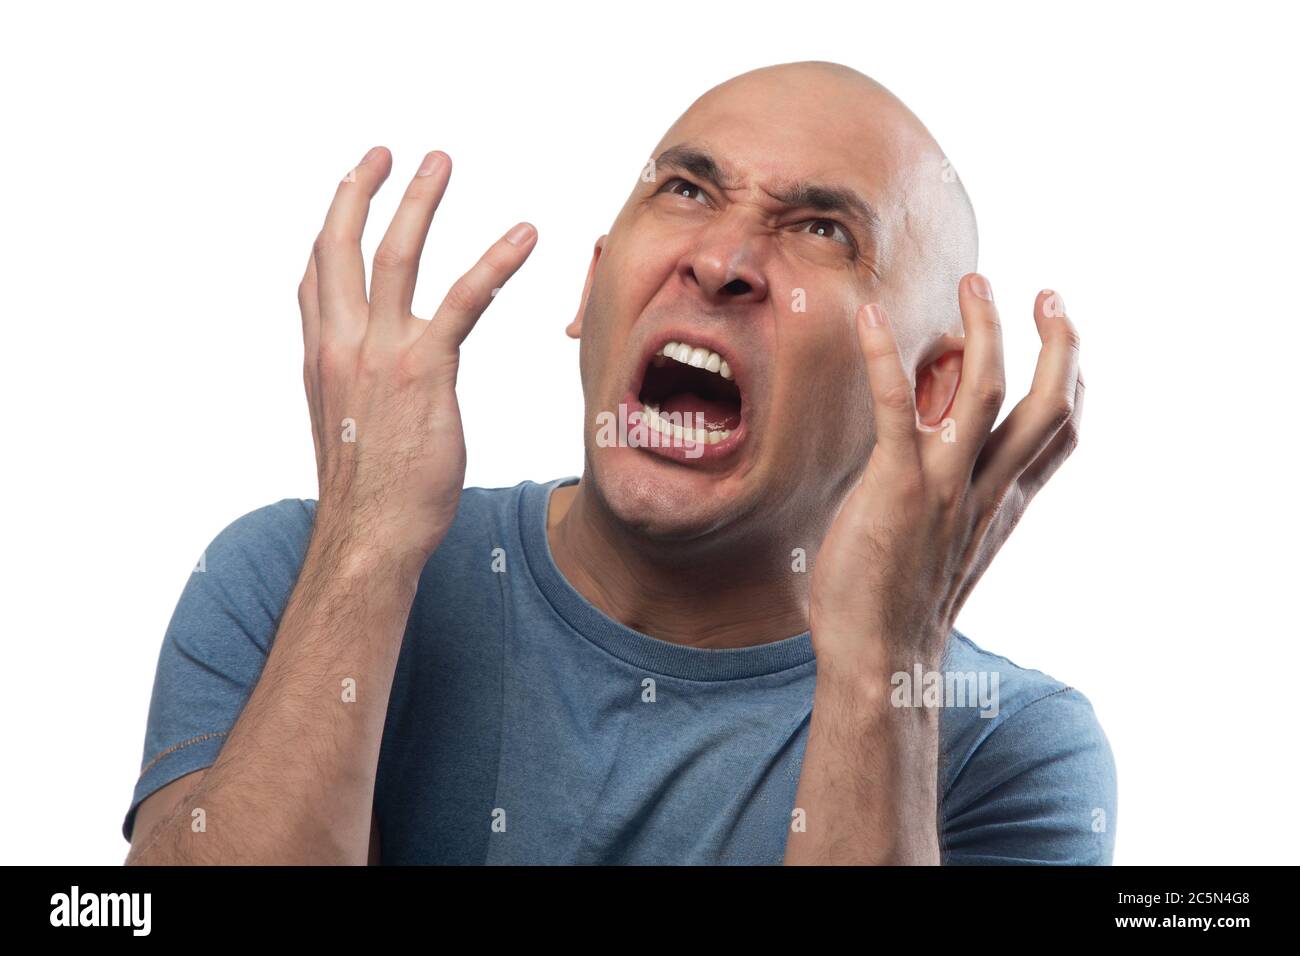 Image of young bald angry screaming man Stock Photo